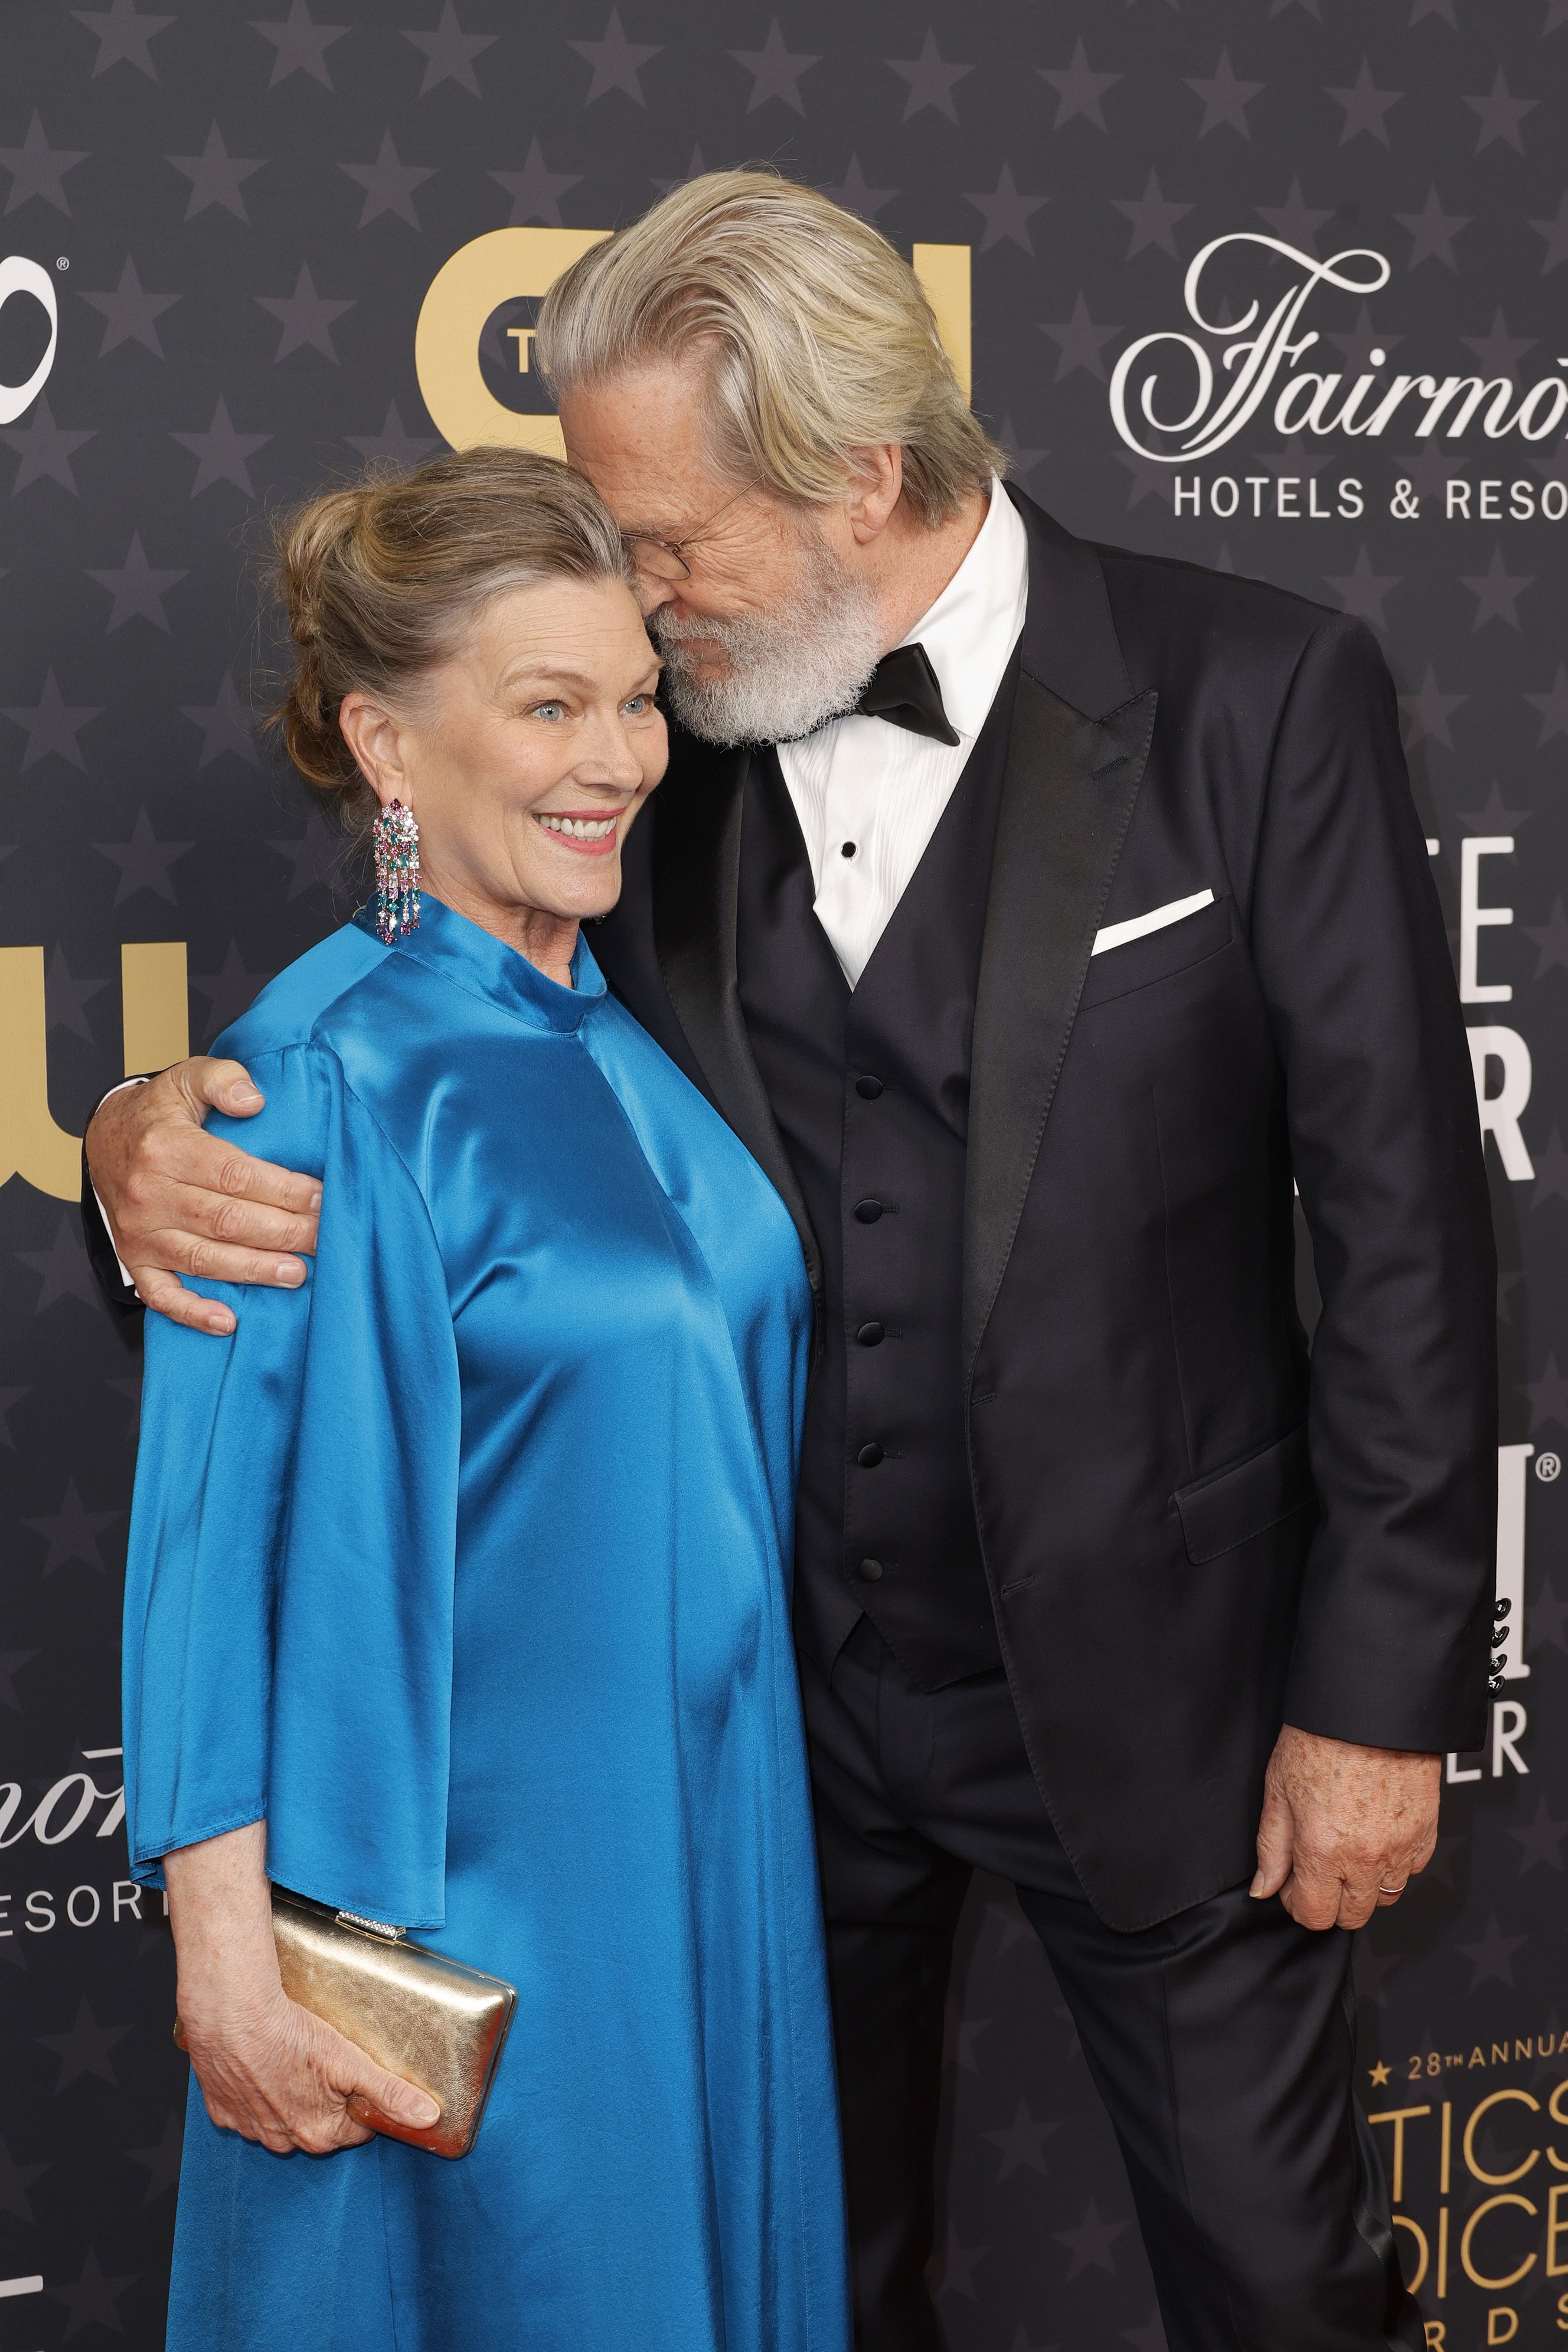 (L-R) Susan Bridges and Jeff Bridges attend the 28th Annual Critics Choice Awards at Fairmont Century Plaza on January 15, 2023 in Los Angeles, California. | Source: Getty Images